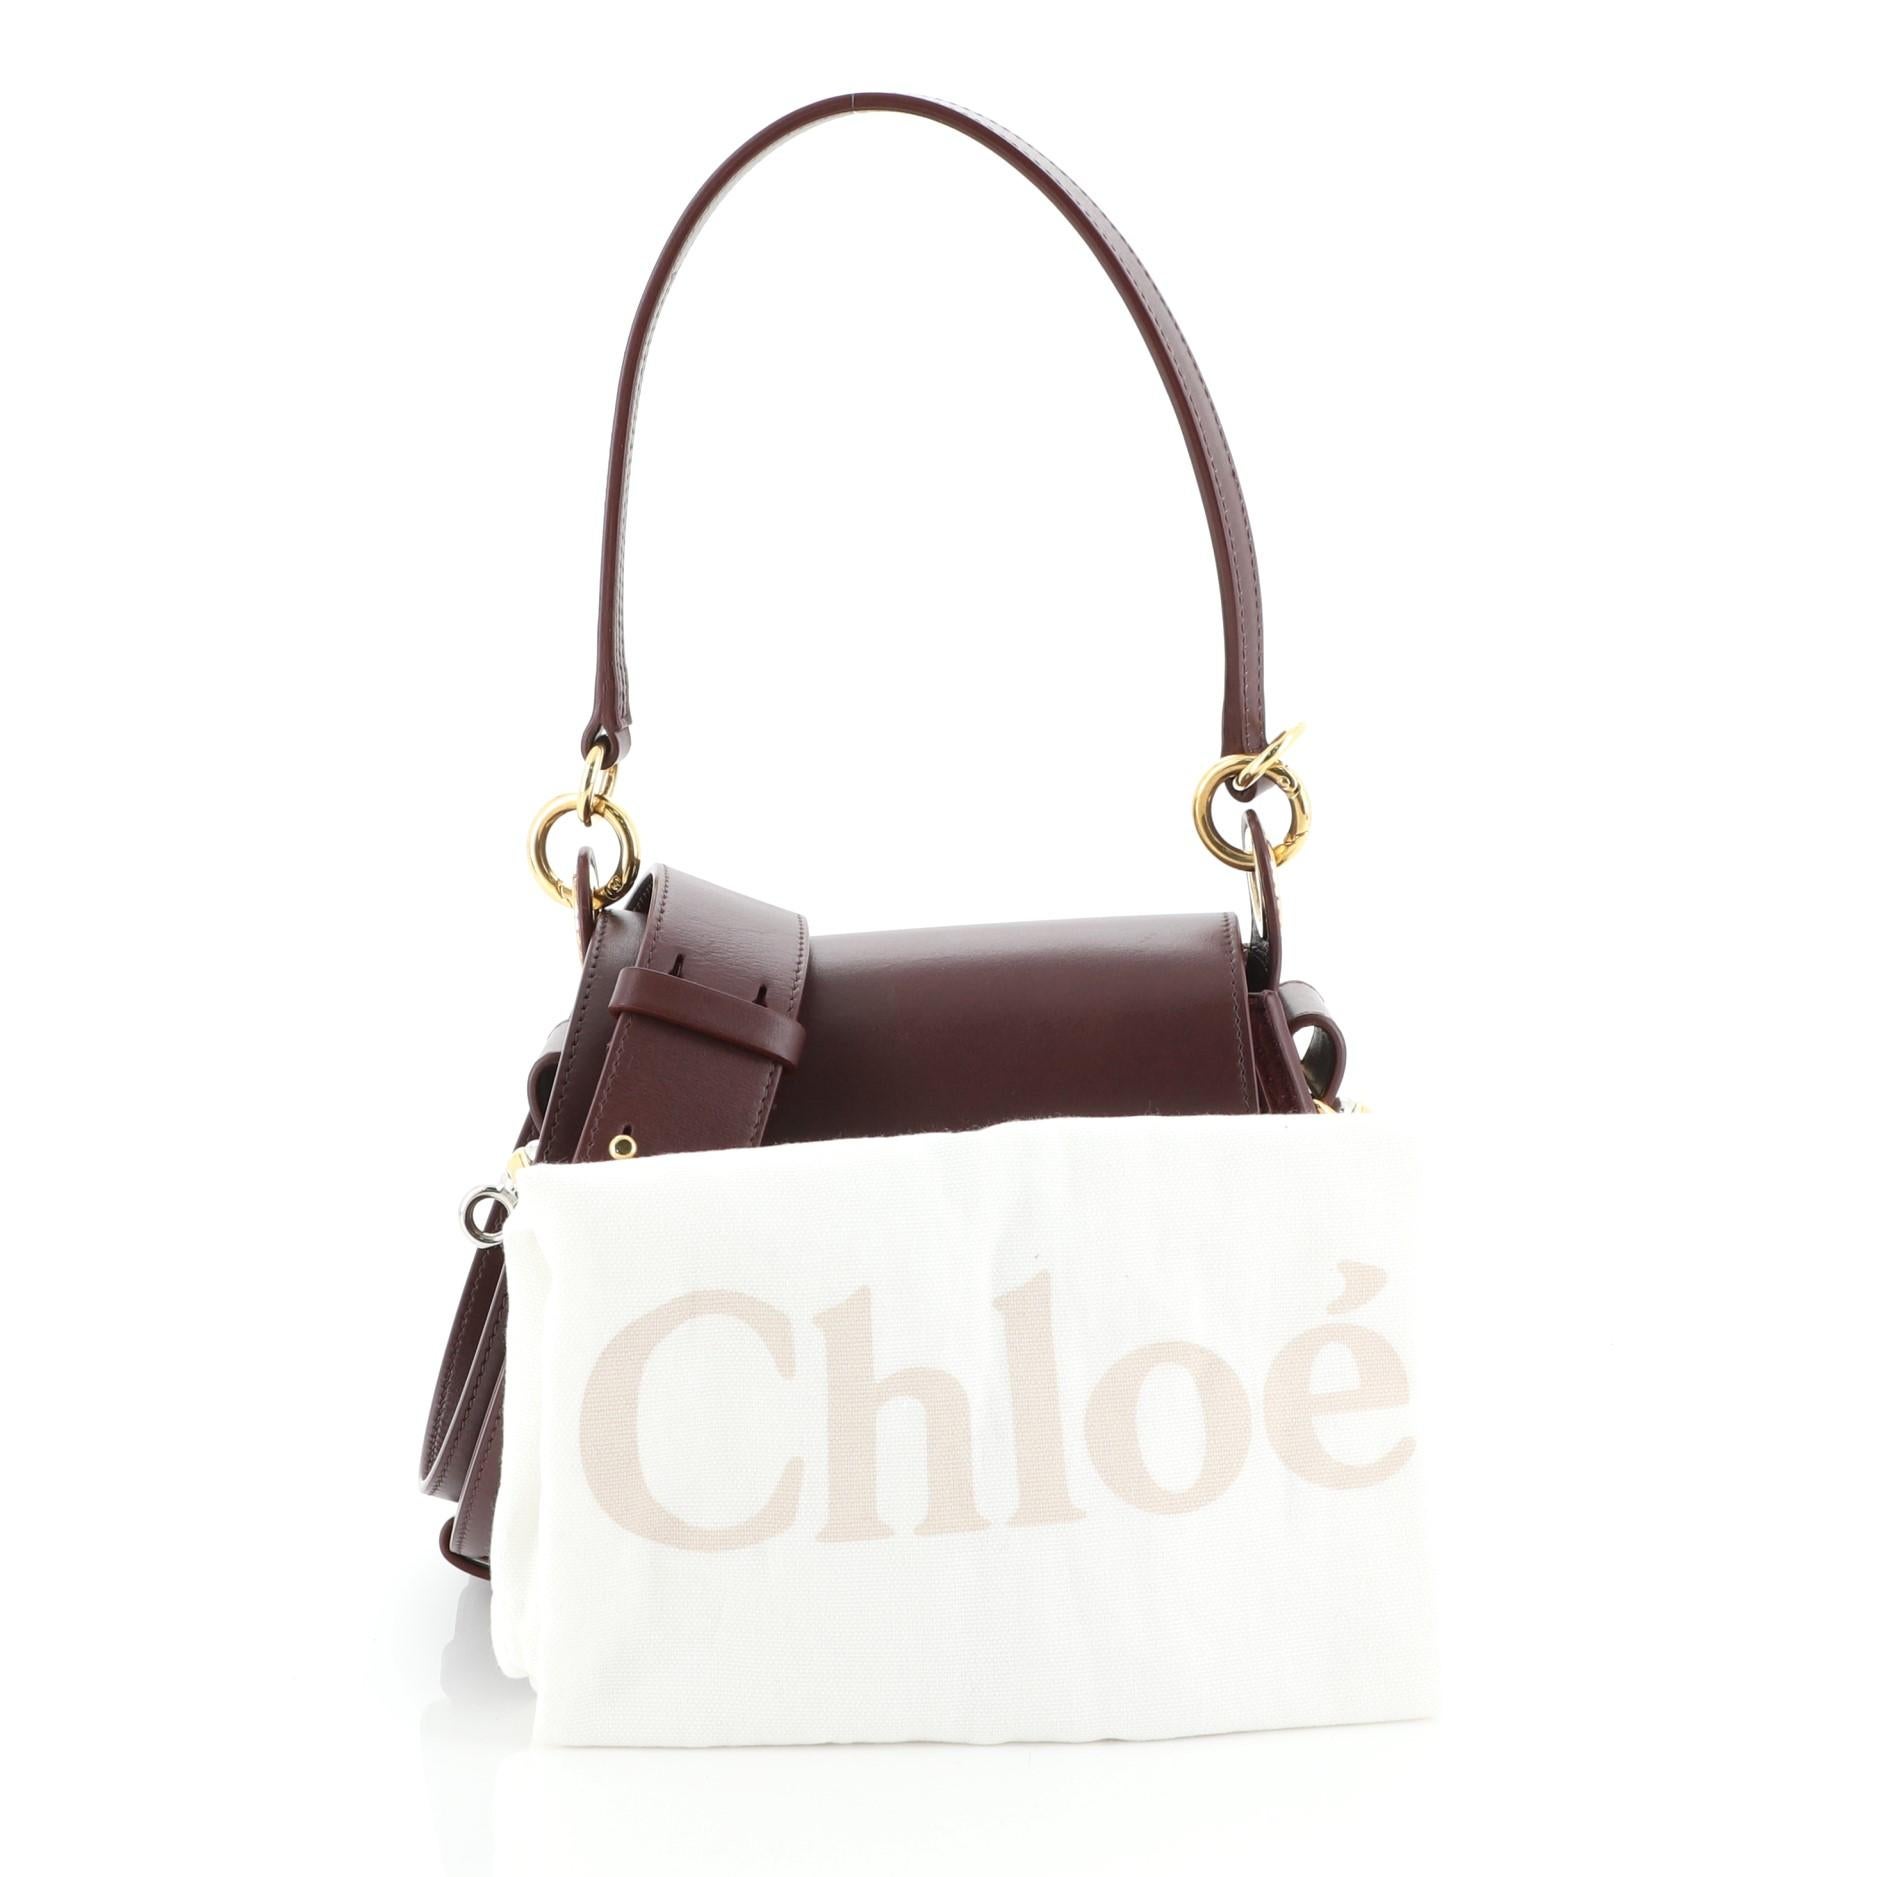 This Chloe Tess Bag Leather Small, crafted from red leather, features a flat leather handle with rings, flat shoulder strap, slip pocket under flap, ring ornament detail, and gold and silver-tone hardware. Its magnetic snap closure opens to a